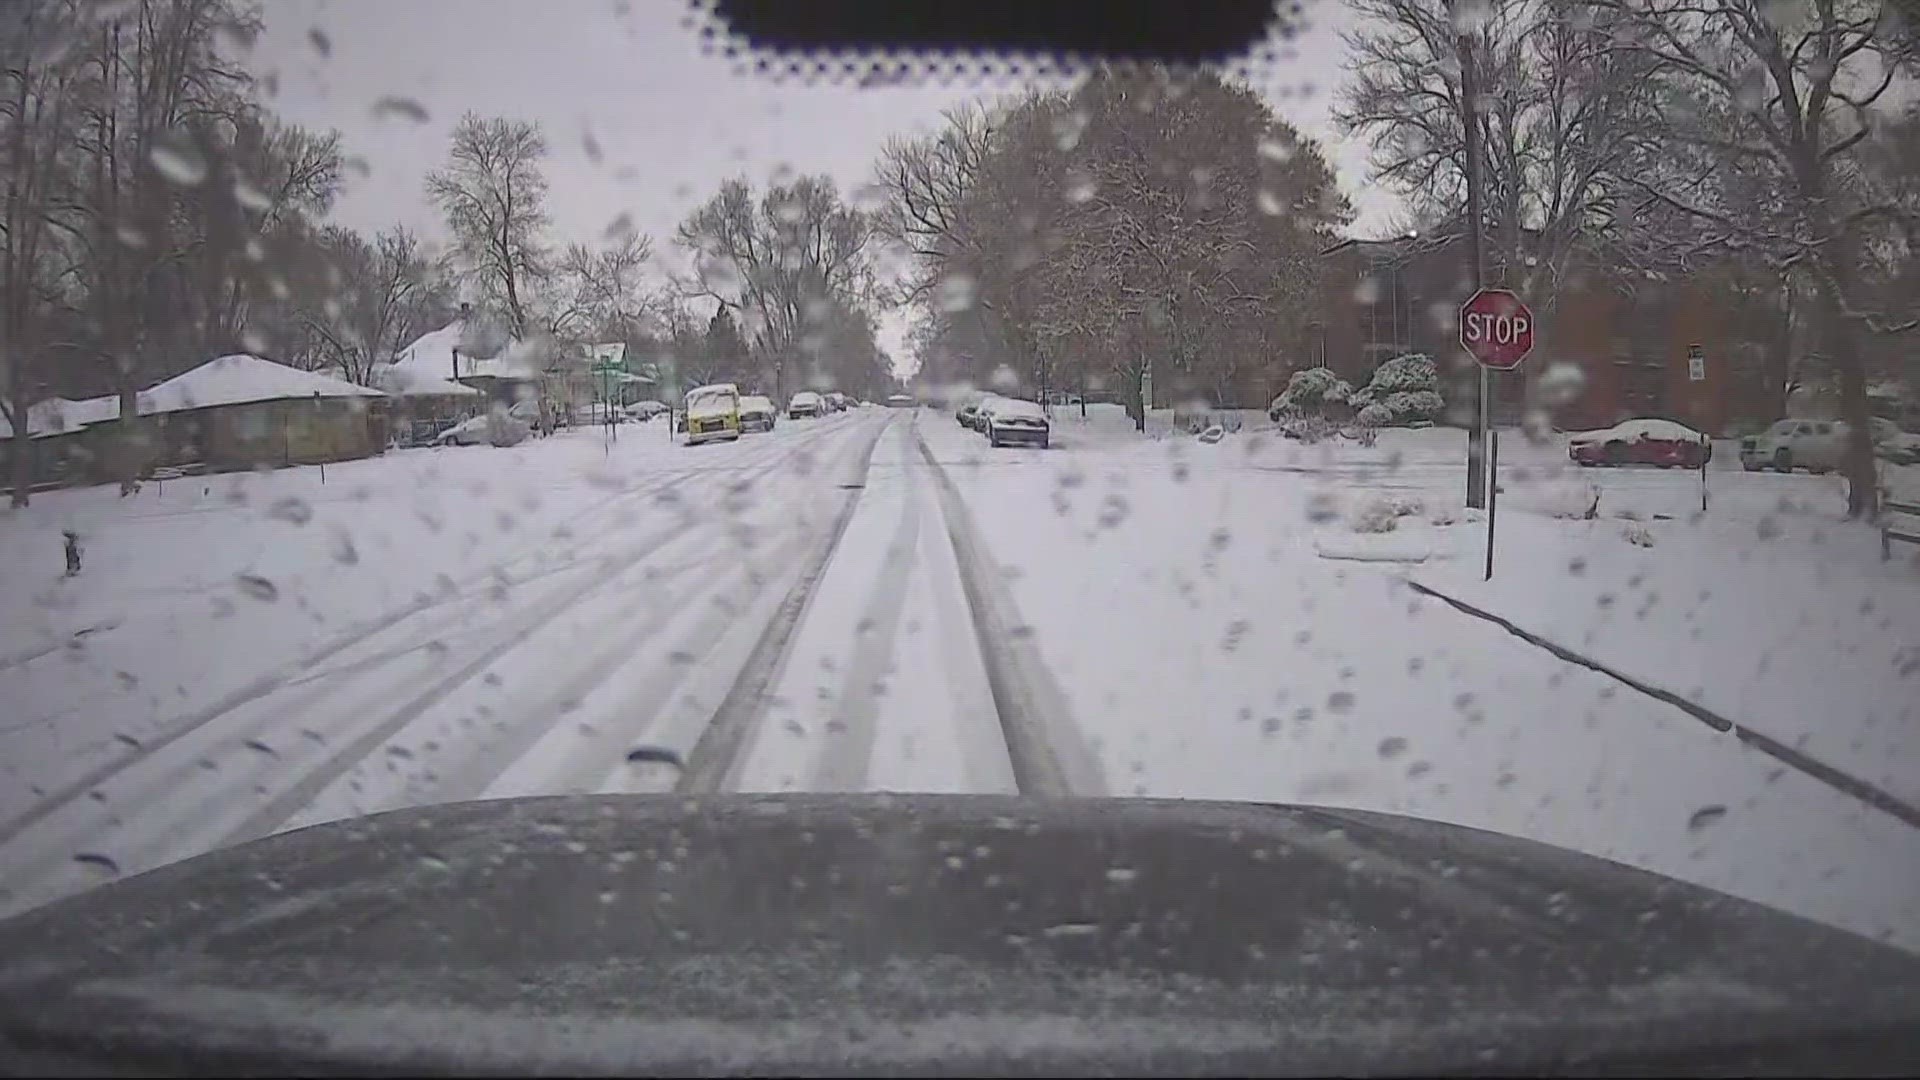 Drivers encountered slick, icy and snowy roads on Black Friday.